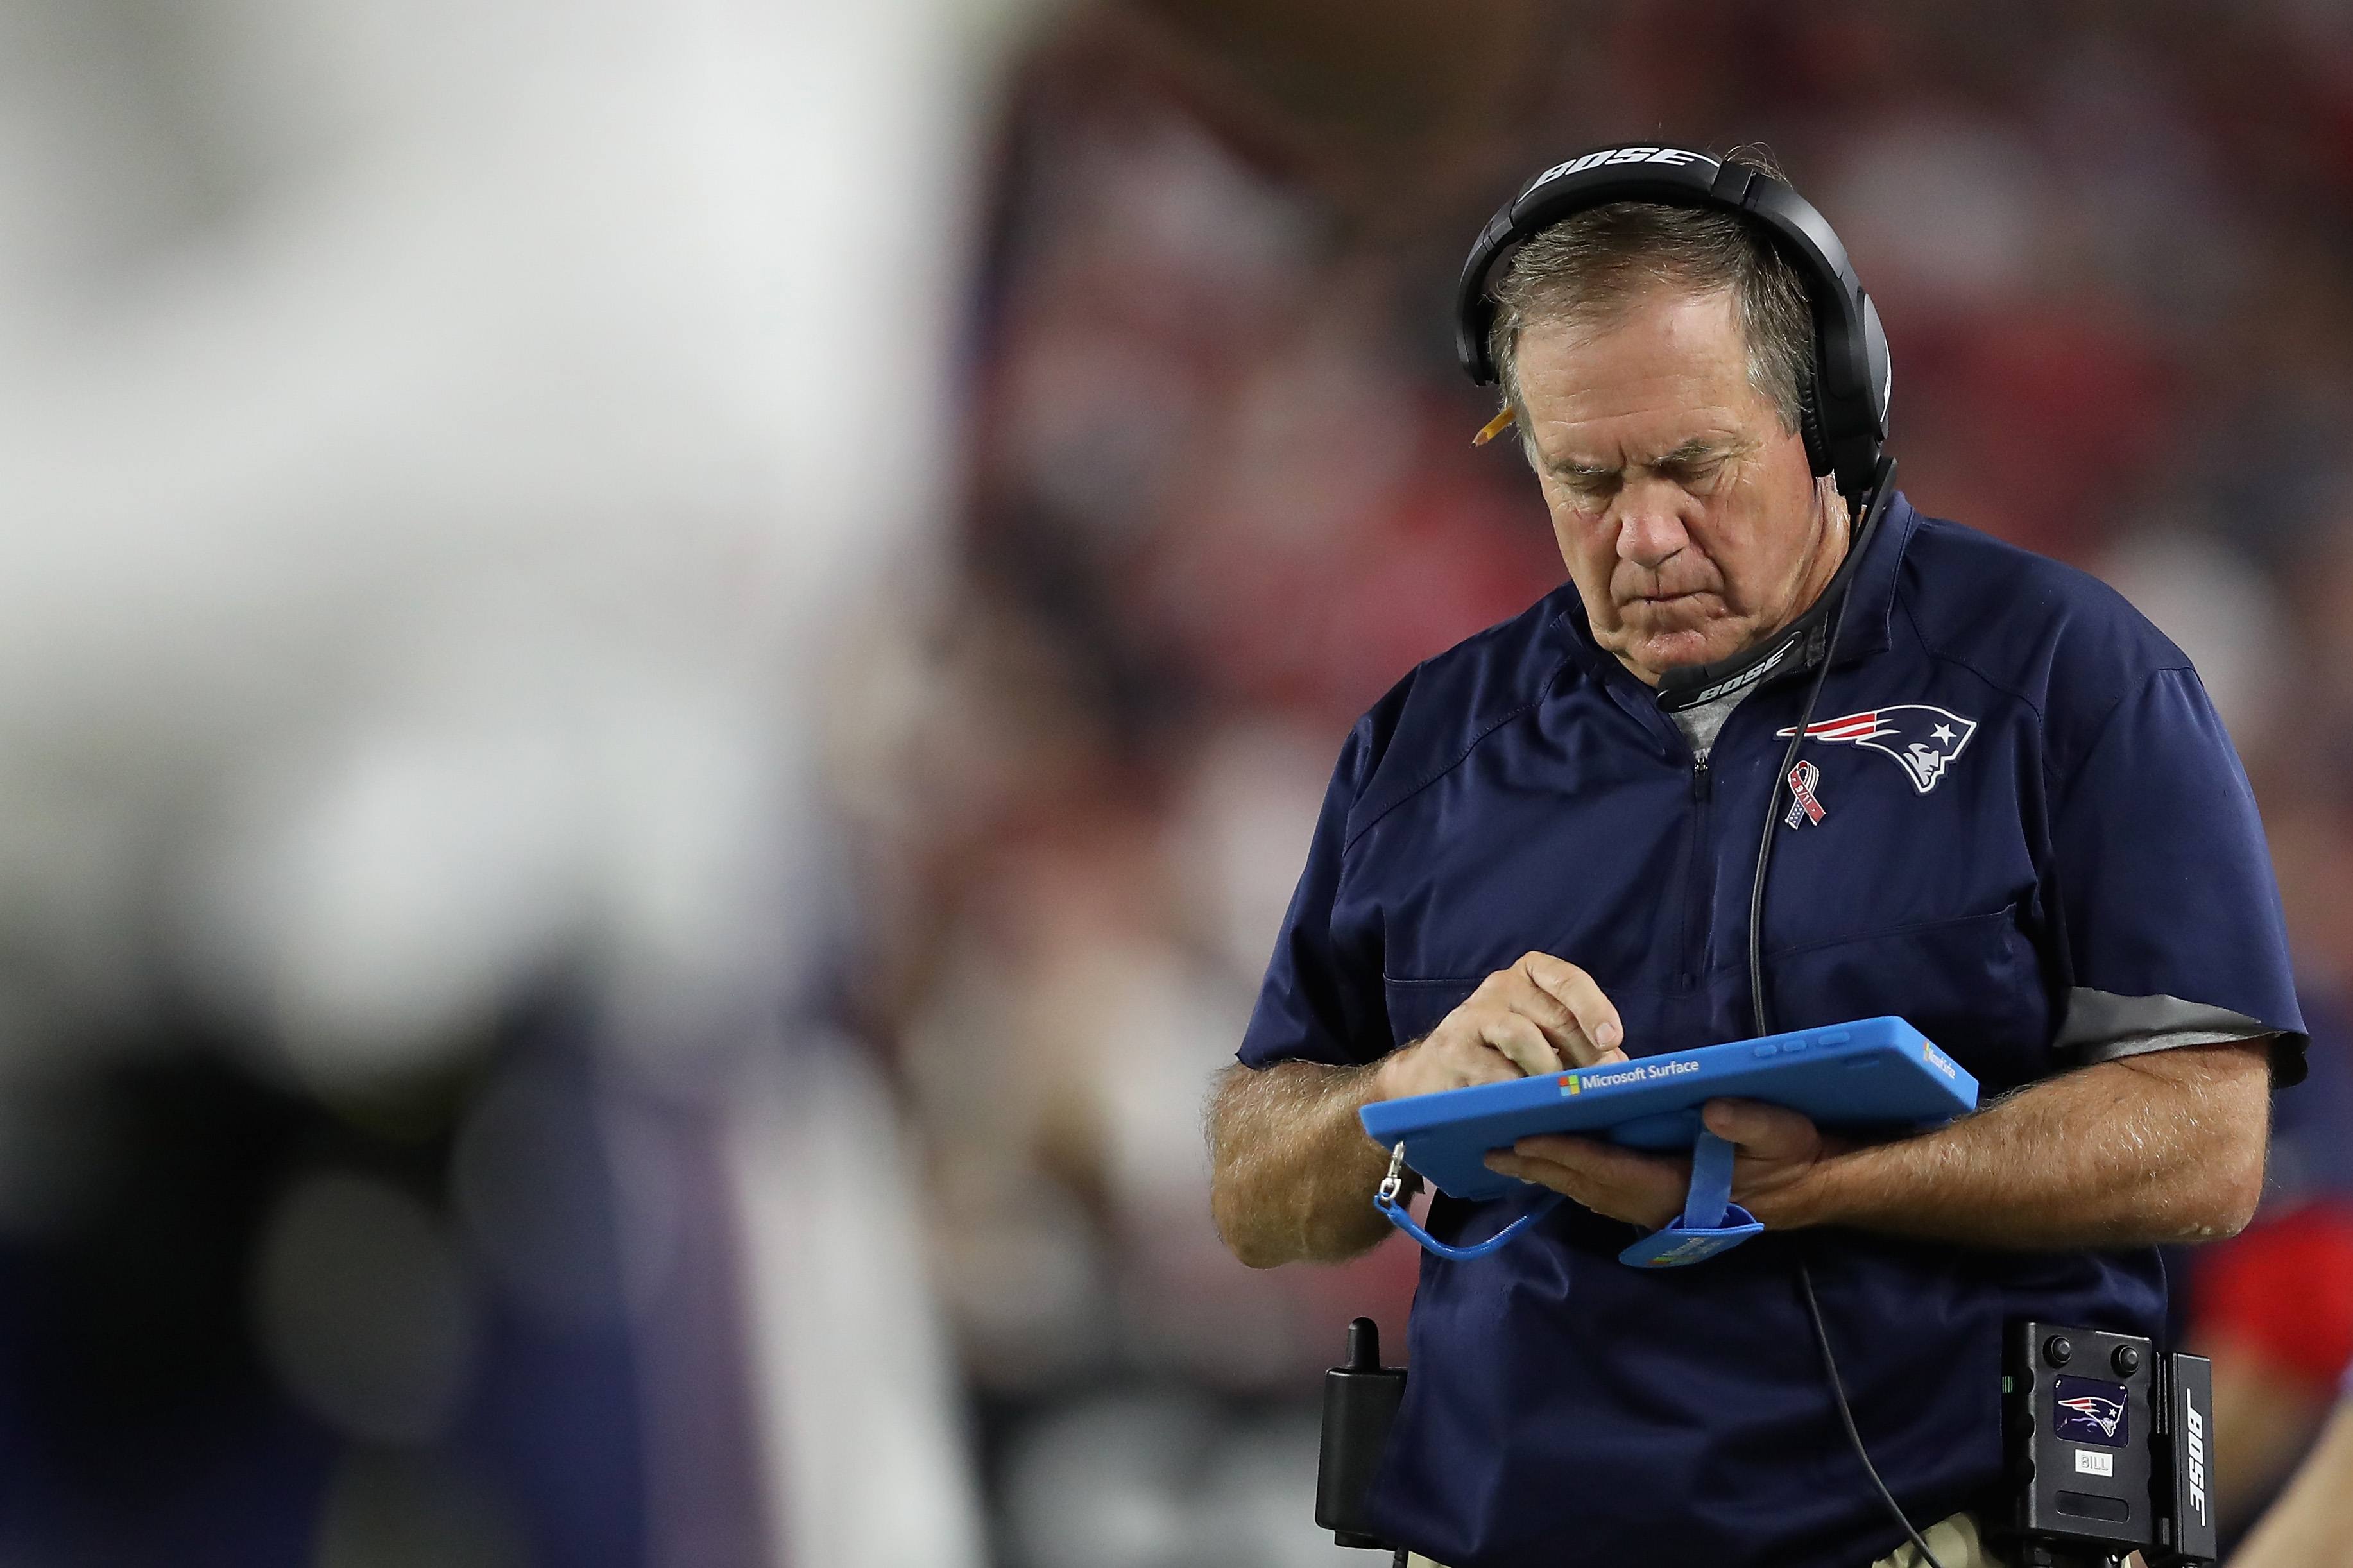 GLENDALE, AZ - SEPTEMBER 11: Head coach Bill Belichick of the New England Patriots works on a microsoft surface tablet as he walks the sidelines during the NFL game against the Arizona Cardinals at the University of Phoenix Stadium on September 11, 2016 in Glendale, Arizona. The Patriots defeated the Cardinals 23-21. (Photo by Christian Petersen/Getty Images)